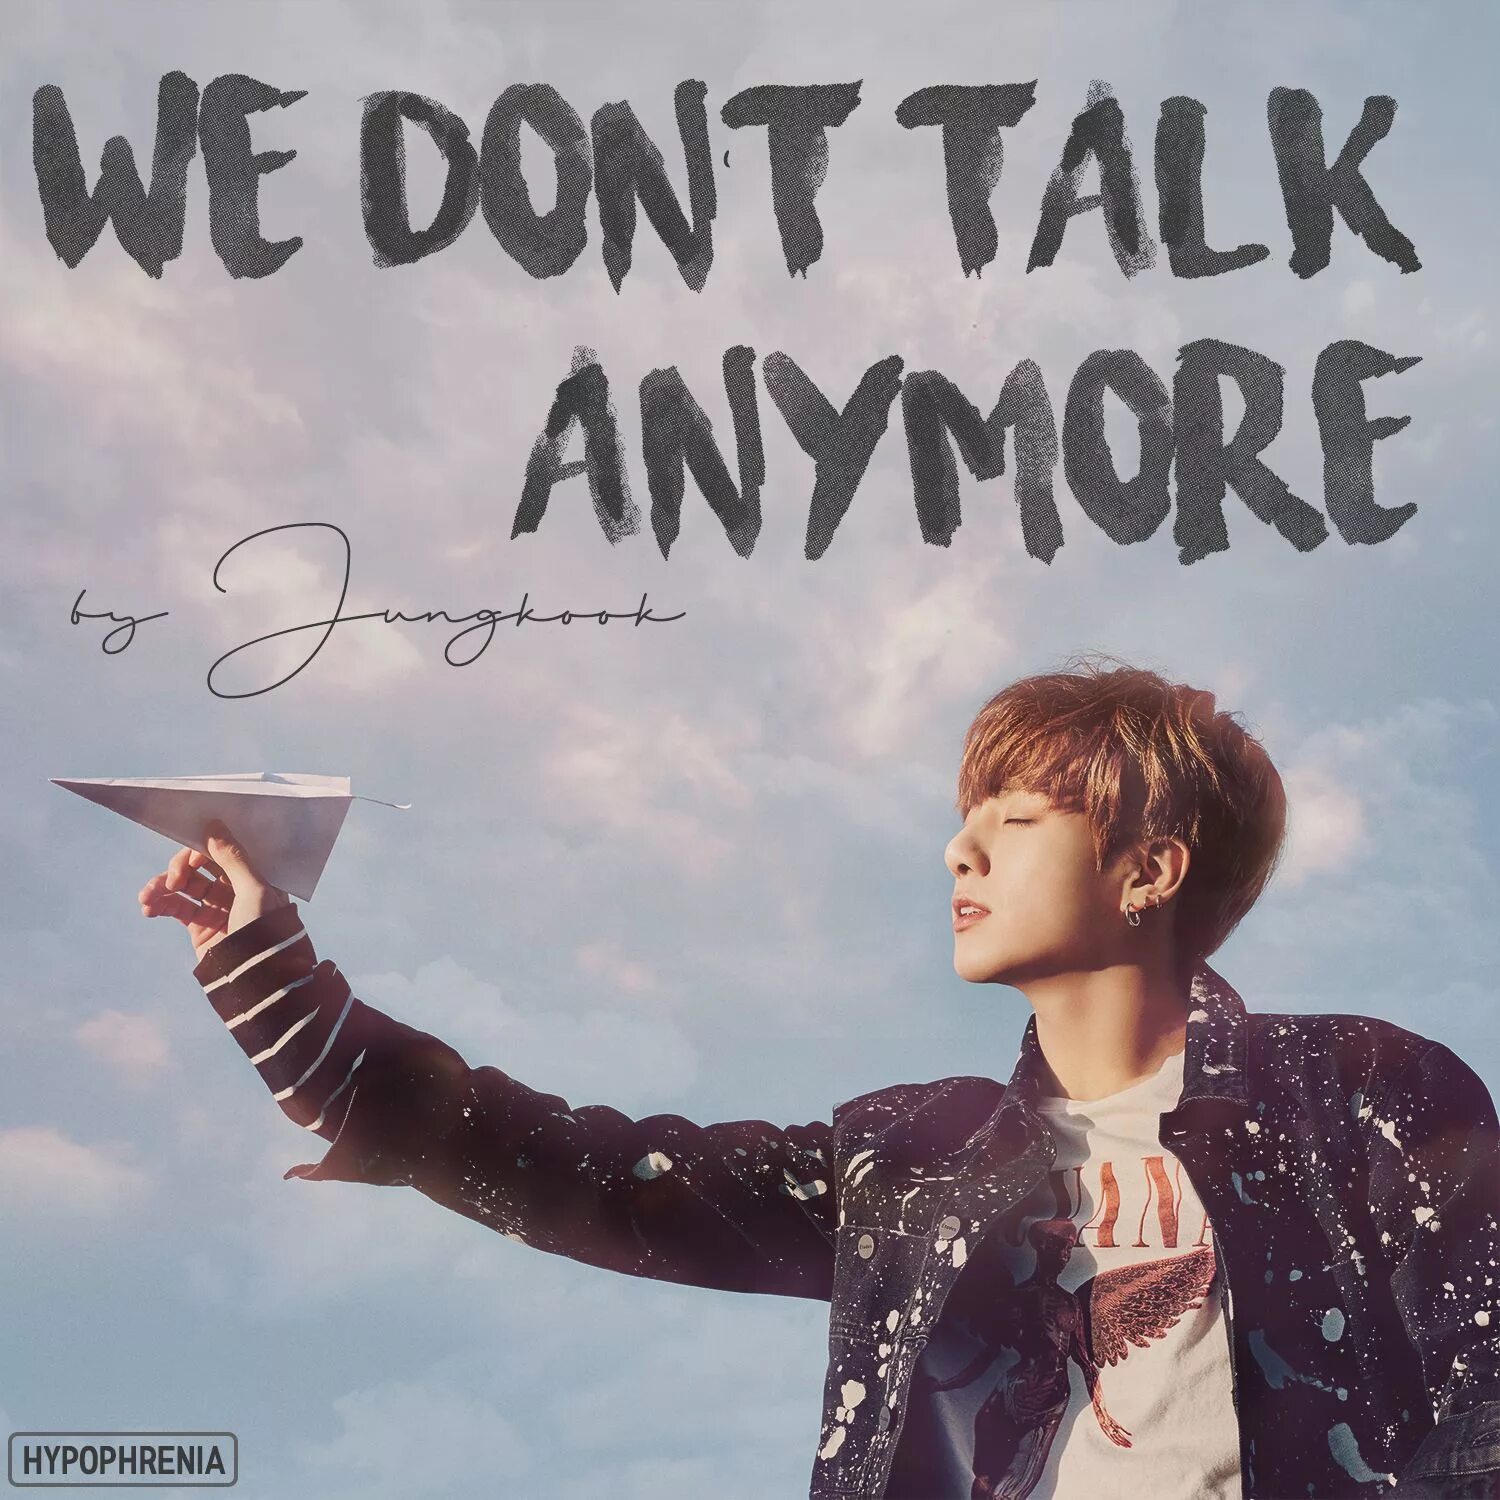 Dont anymore. We don't talk anymore BTS. BTS Чонгук обложка. Чонгук we don't talk anymore. We don't talk anymore Jungkook обложка.